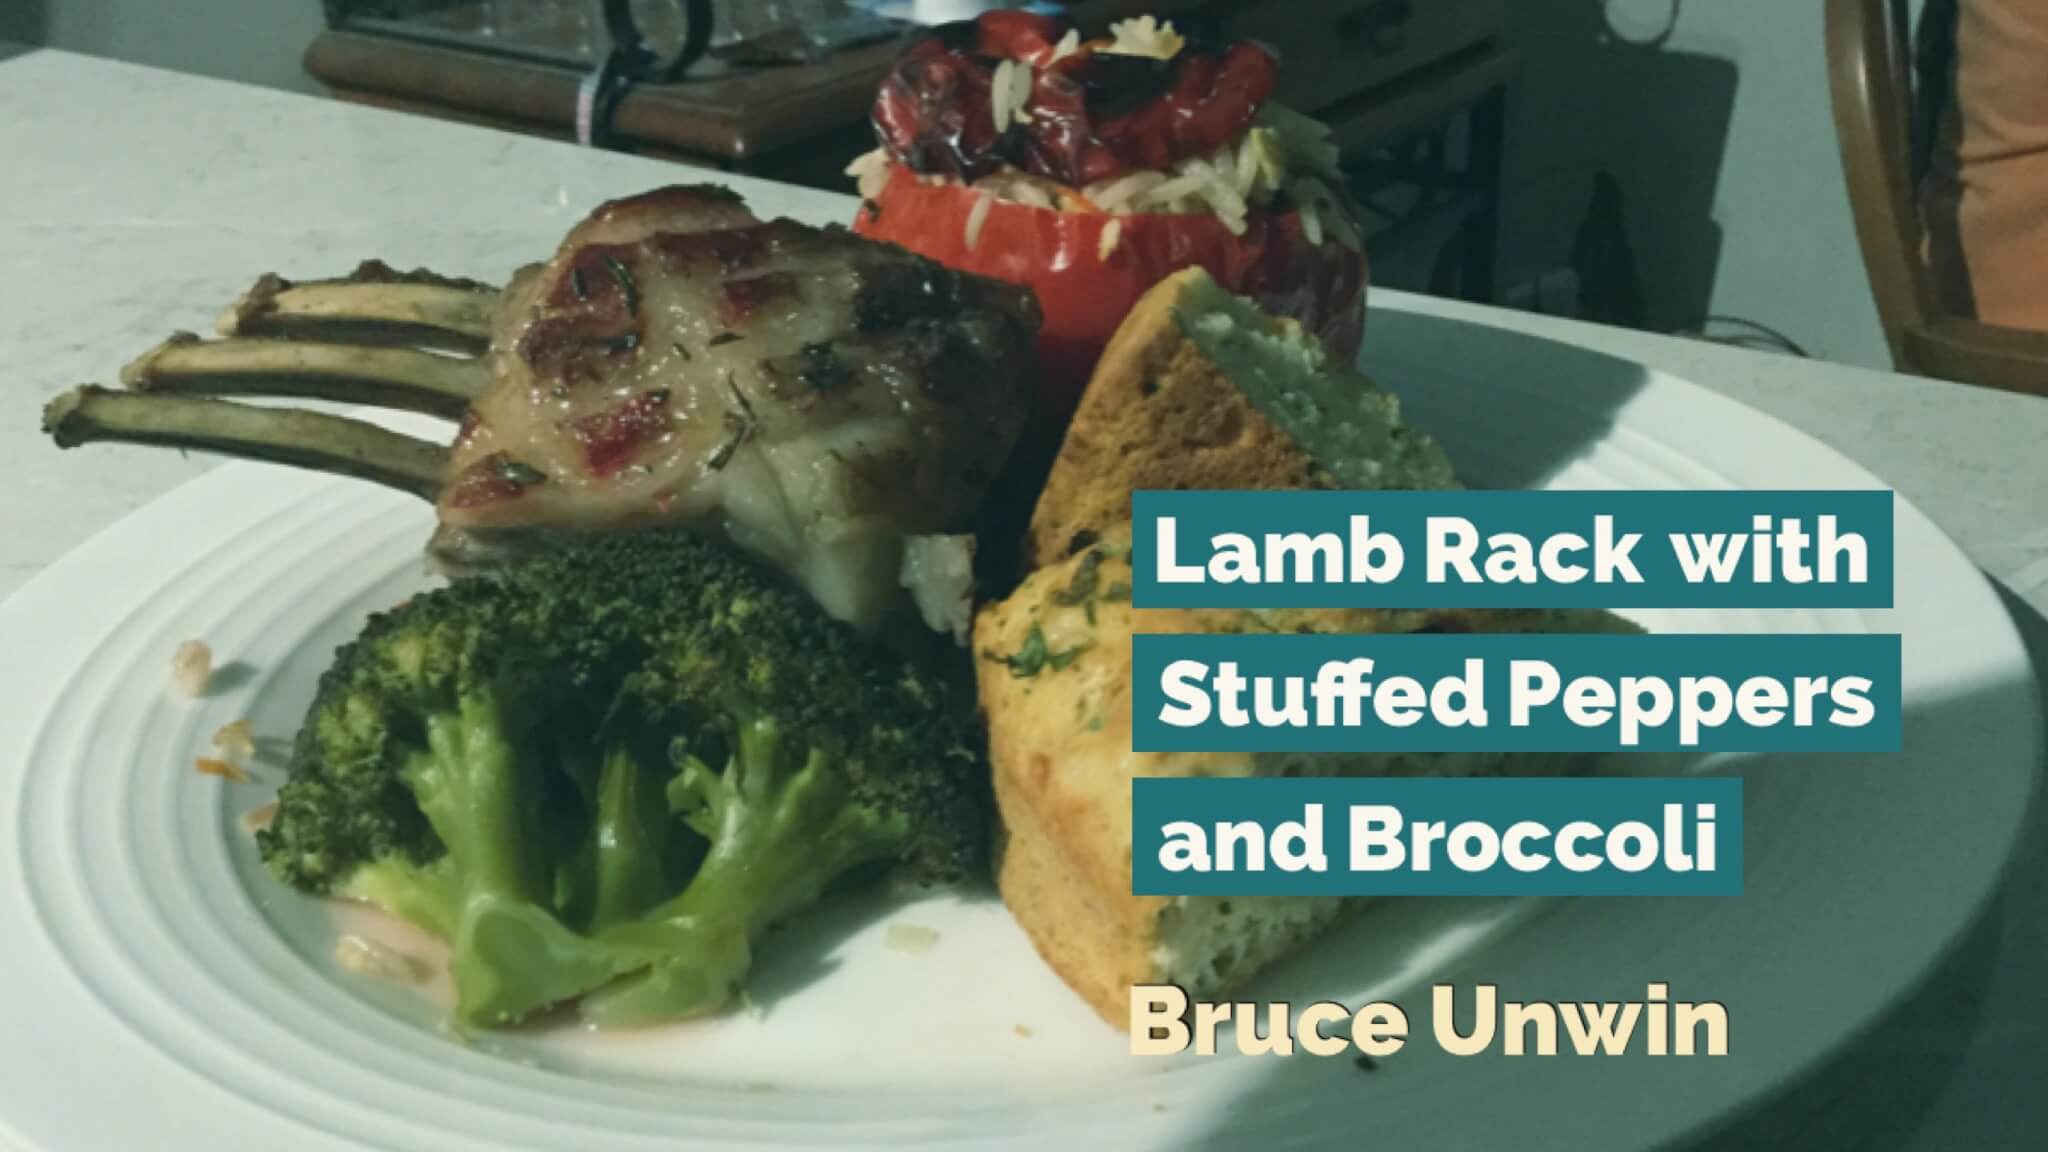 Lamb Rack with Stuffed Peppers and Broccoli | Bruce Unwin